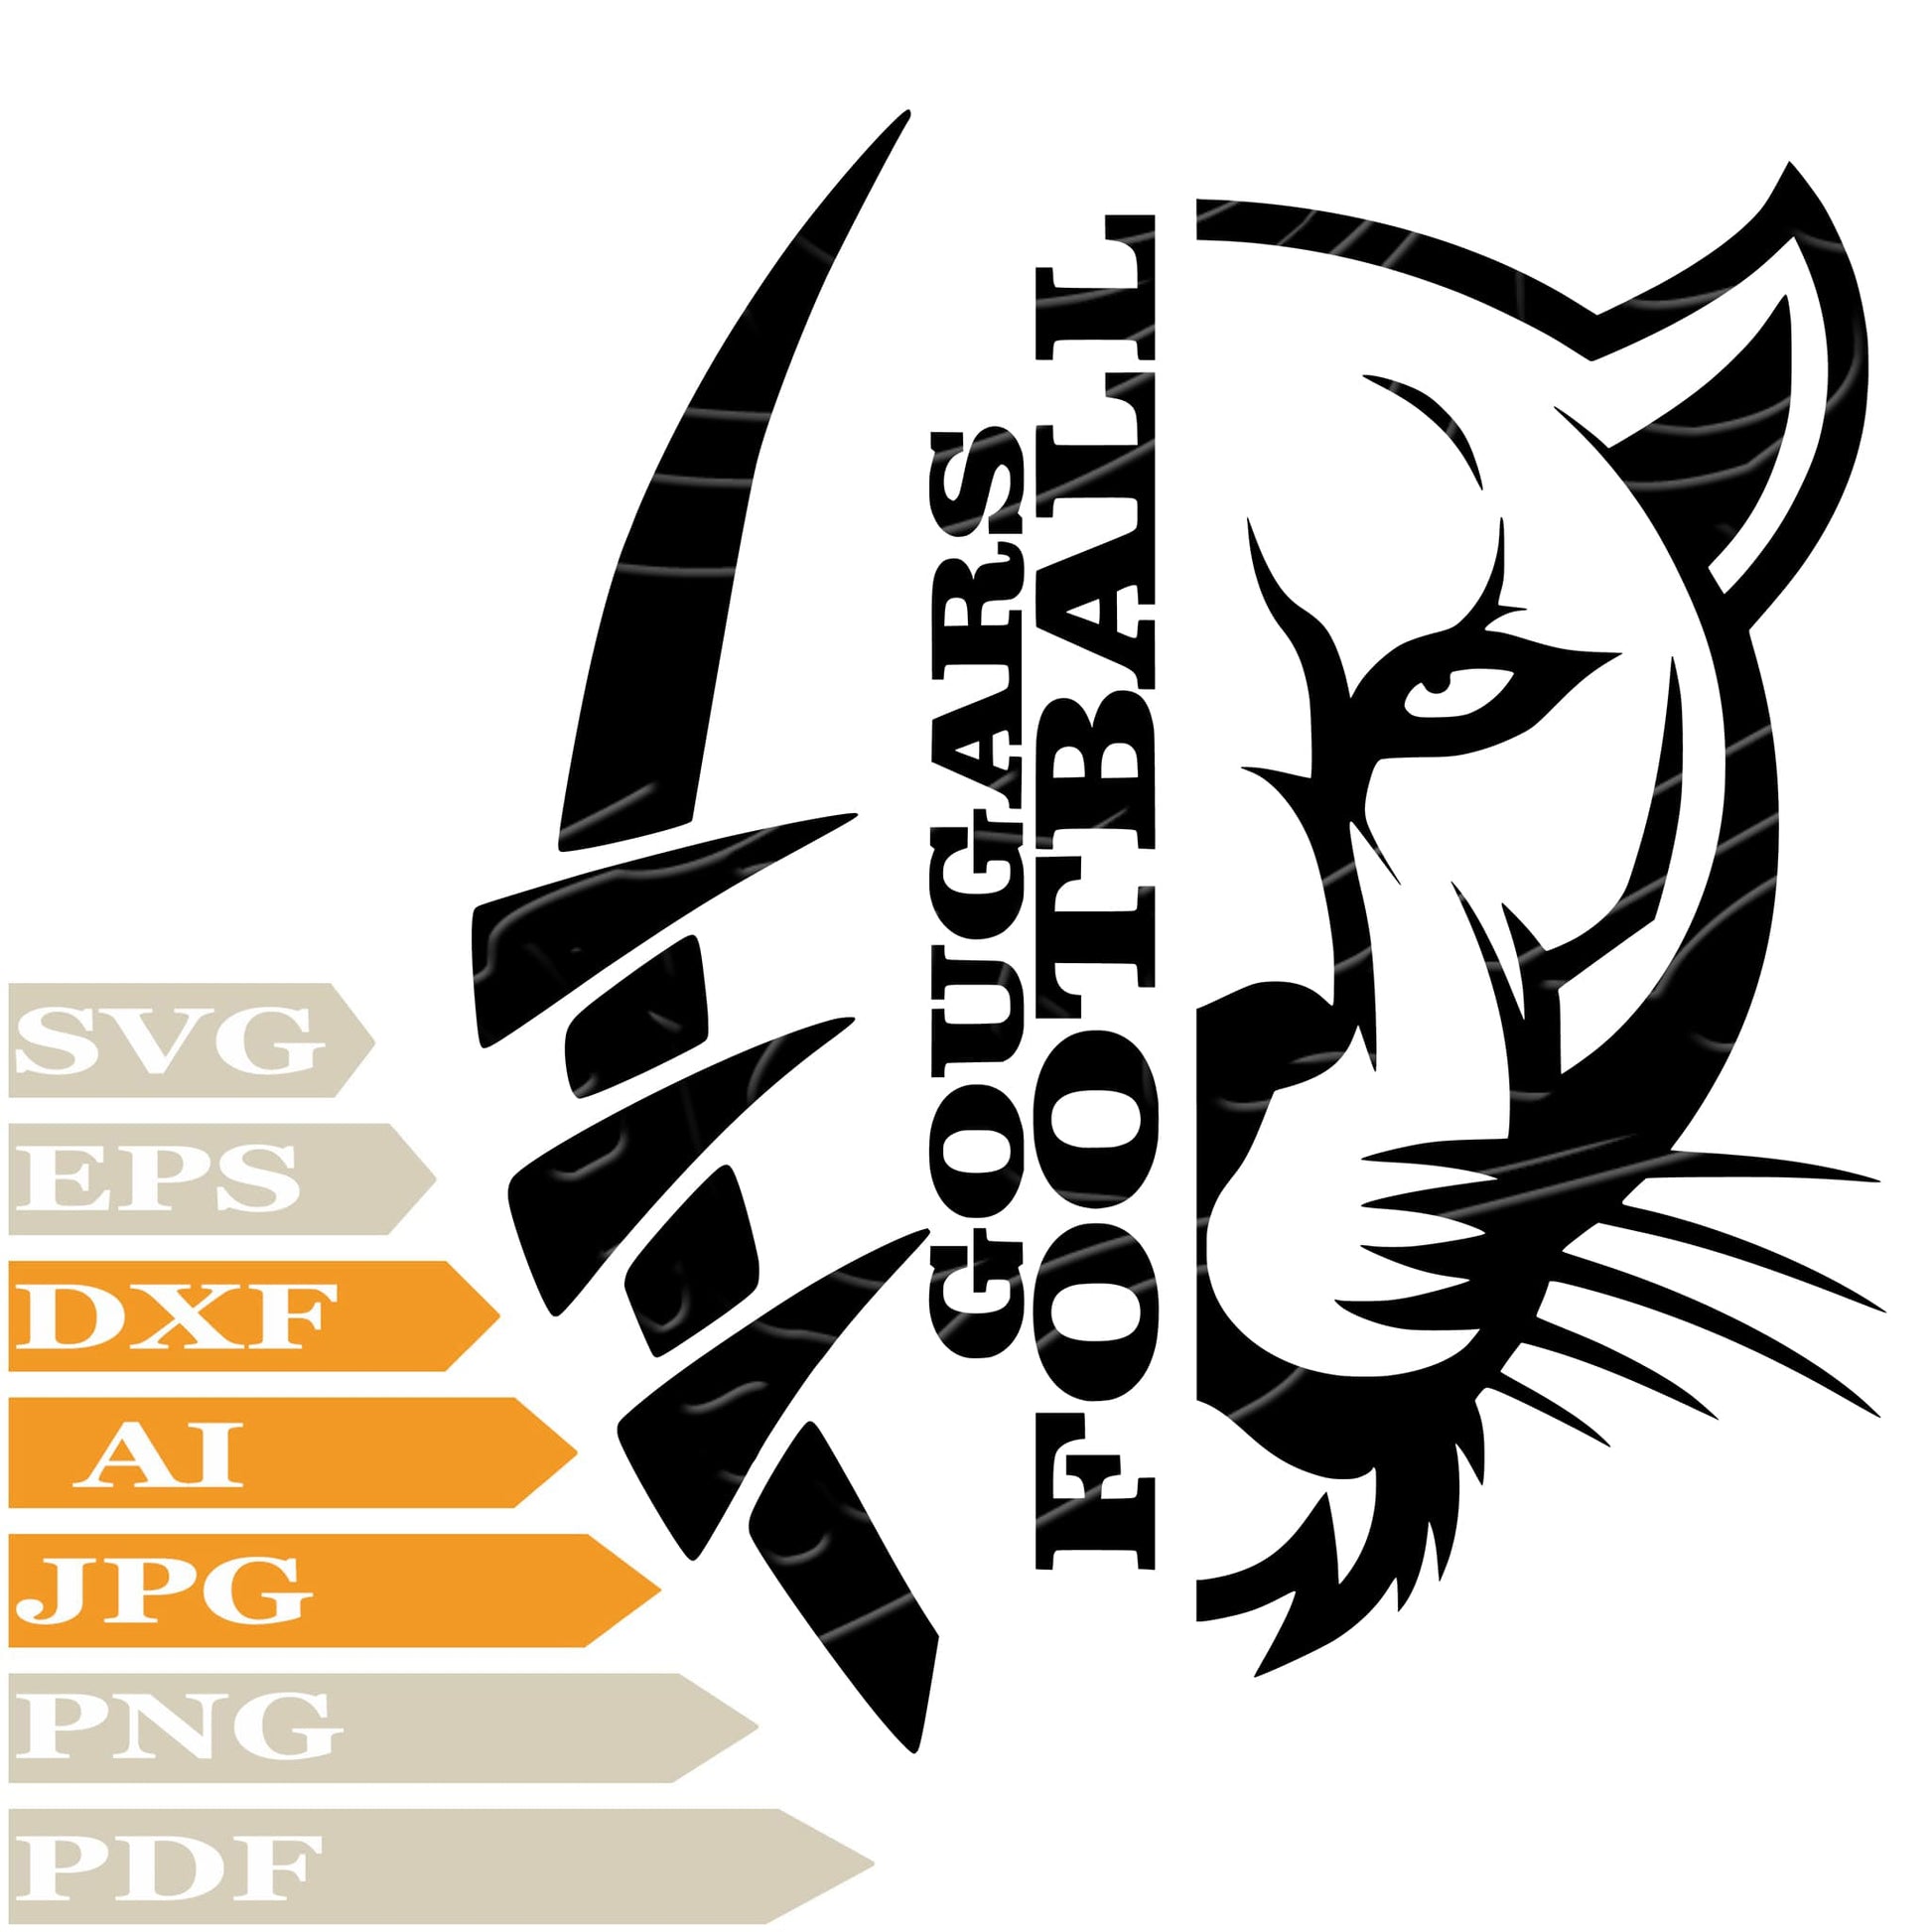 Cougars Football Logo SVG File, Cougars SVG Design, Cougars Football Team Masciot Vector Graphics, Cougars Football PNG, Image Cut, Cricut, Clipart, Instant Download, Clip Art, Silhouette